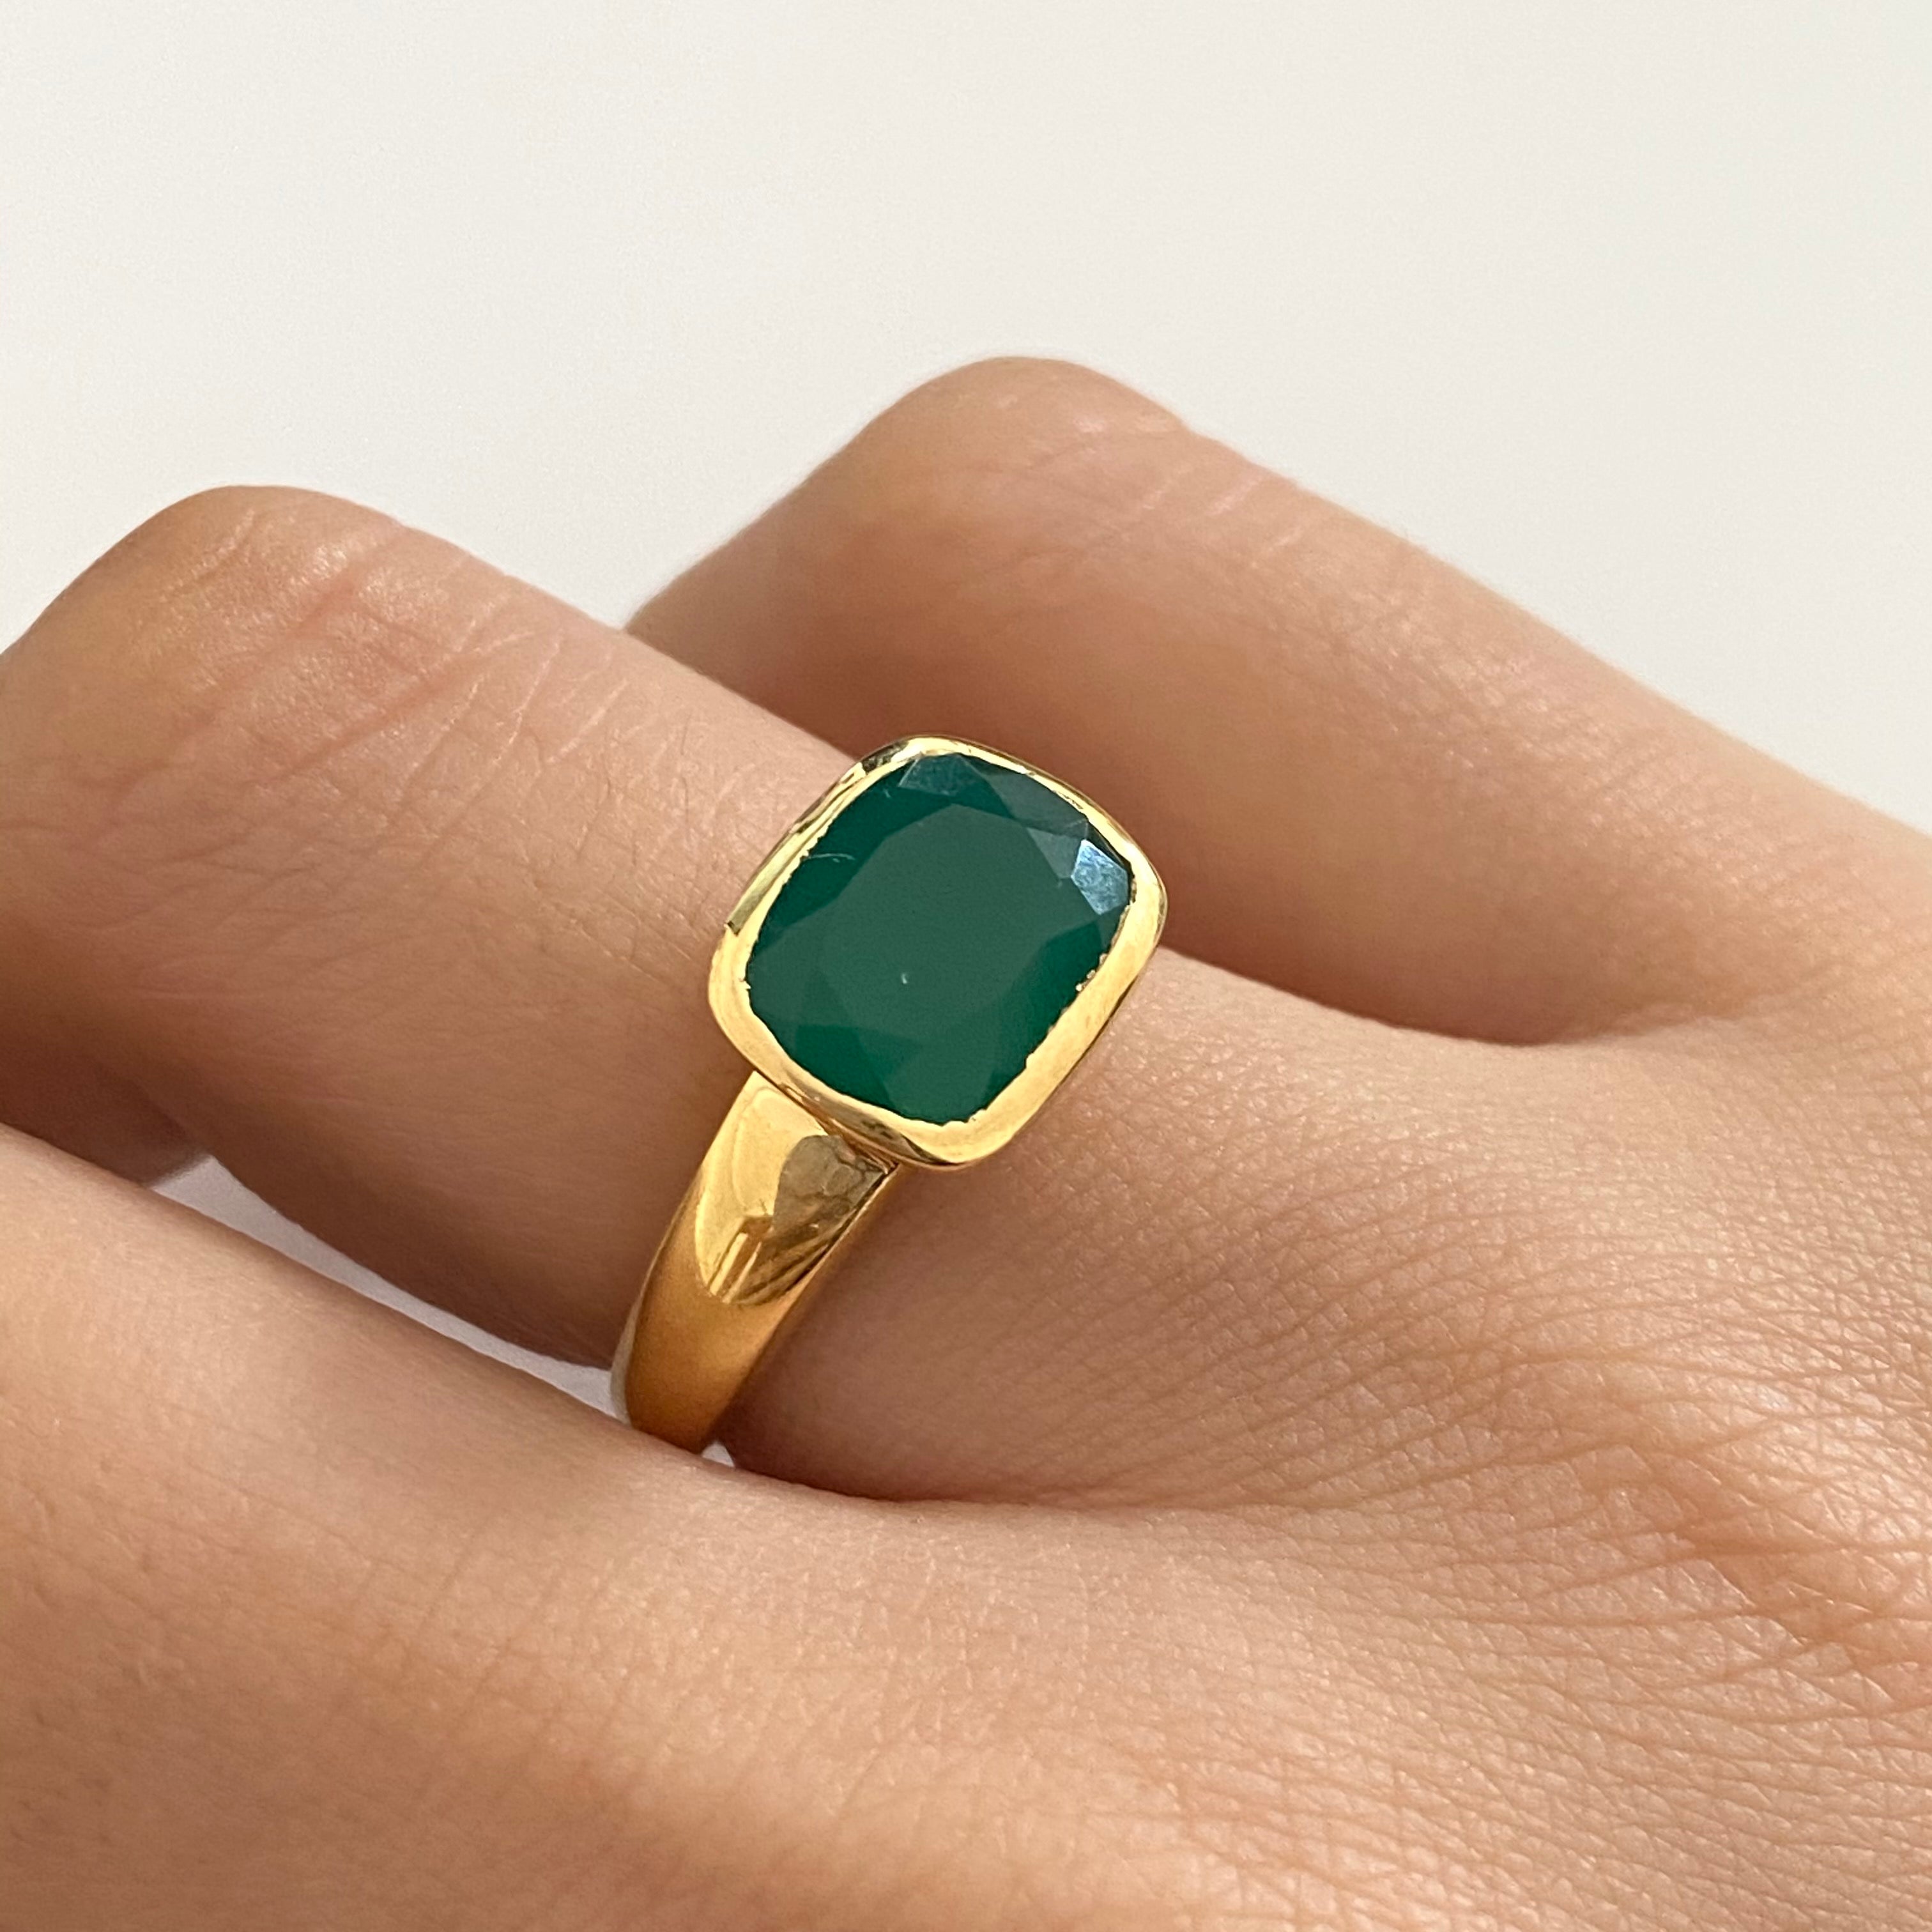 Faceted Rectangular Cut Natural Gemstone Gold Plated Sterling Silver Ring - Green Onyx